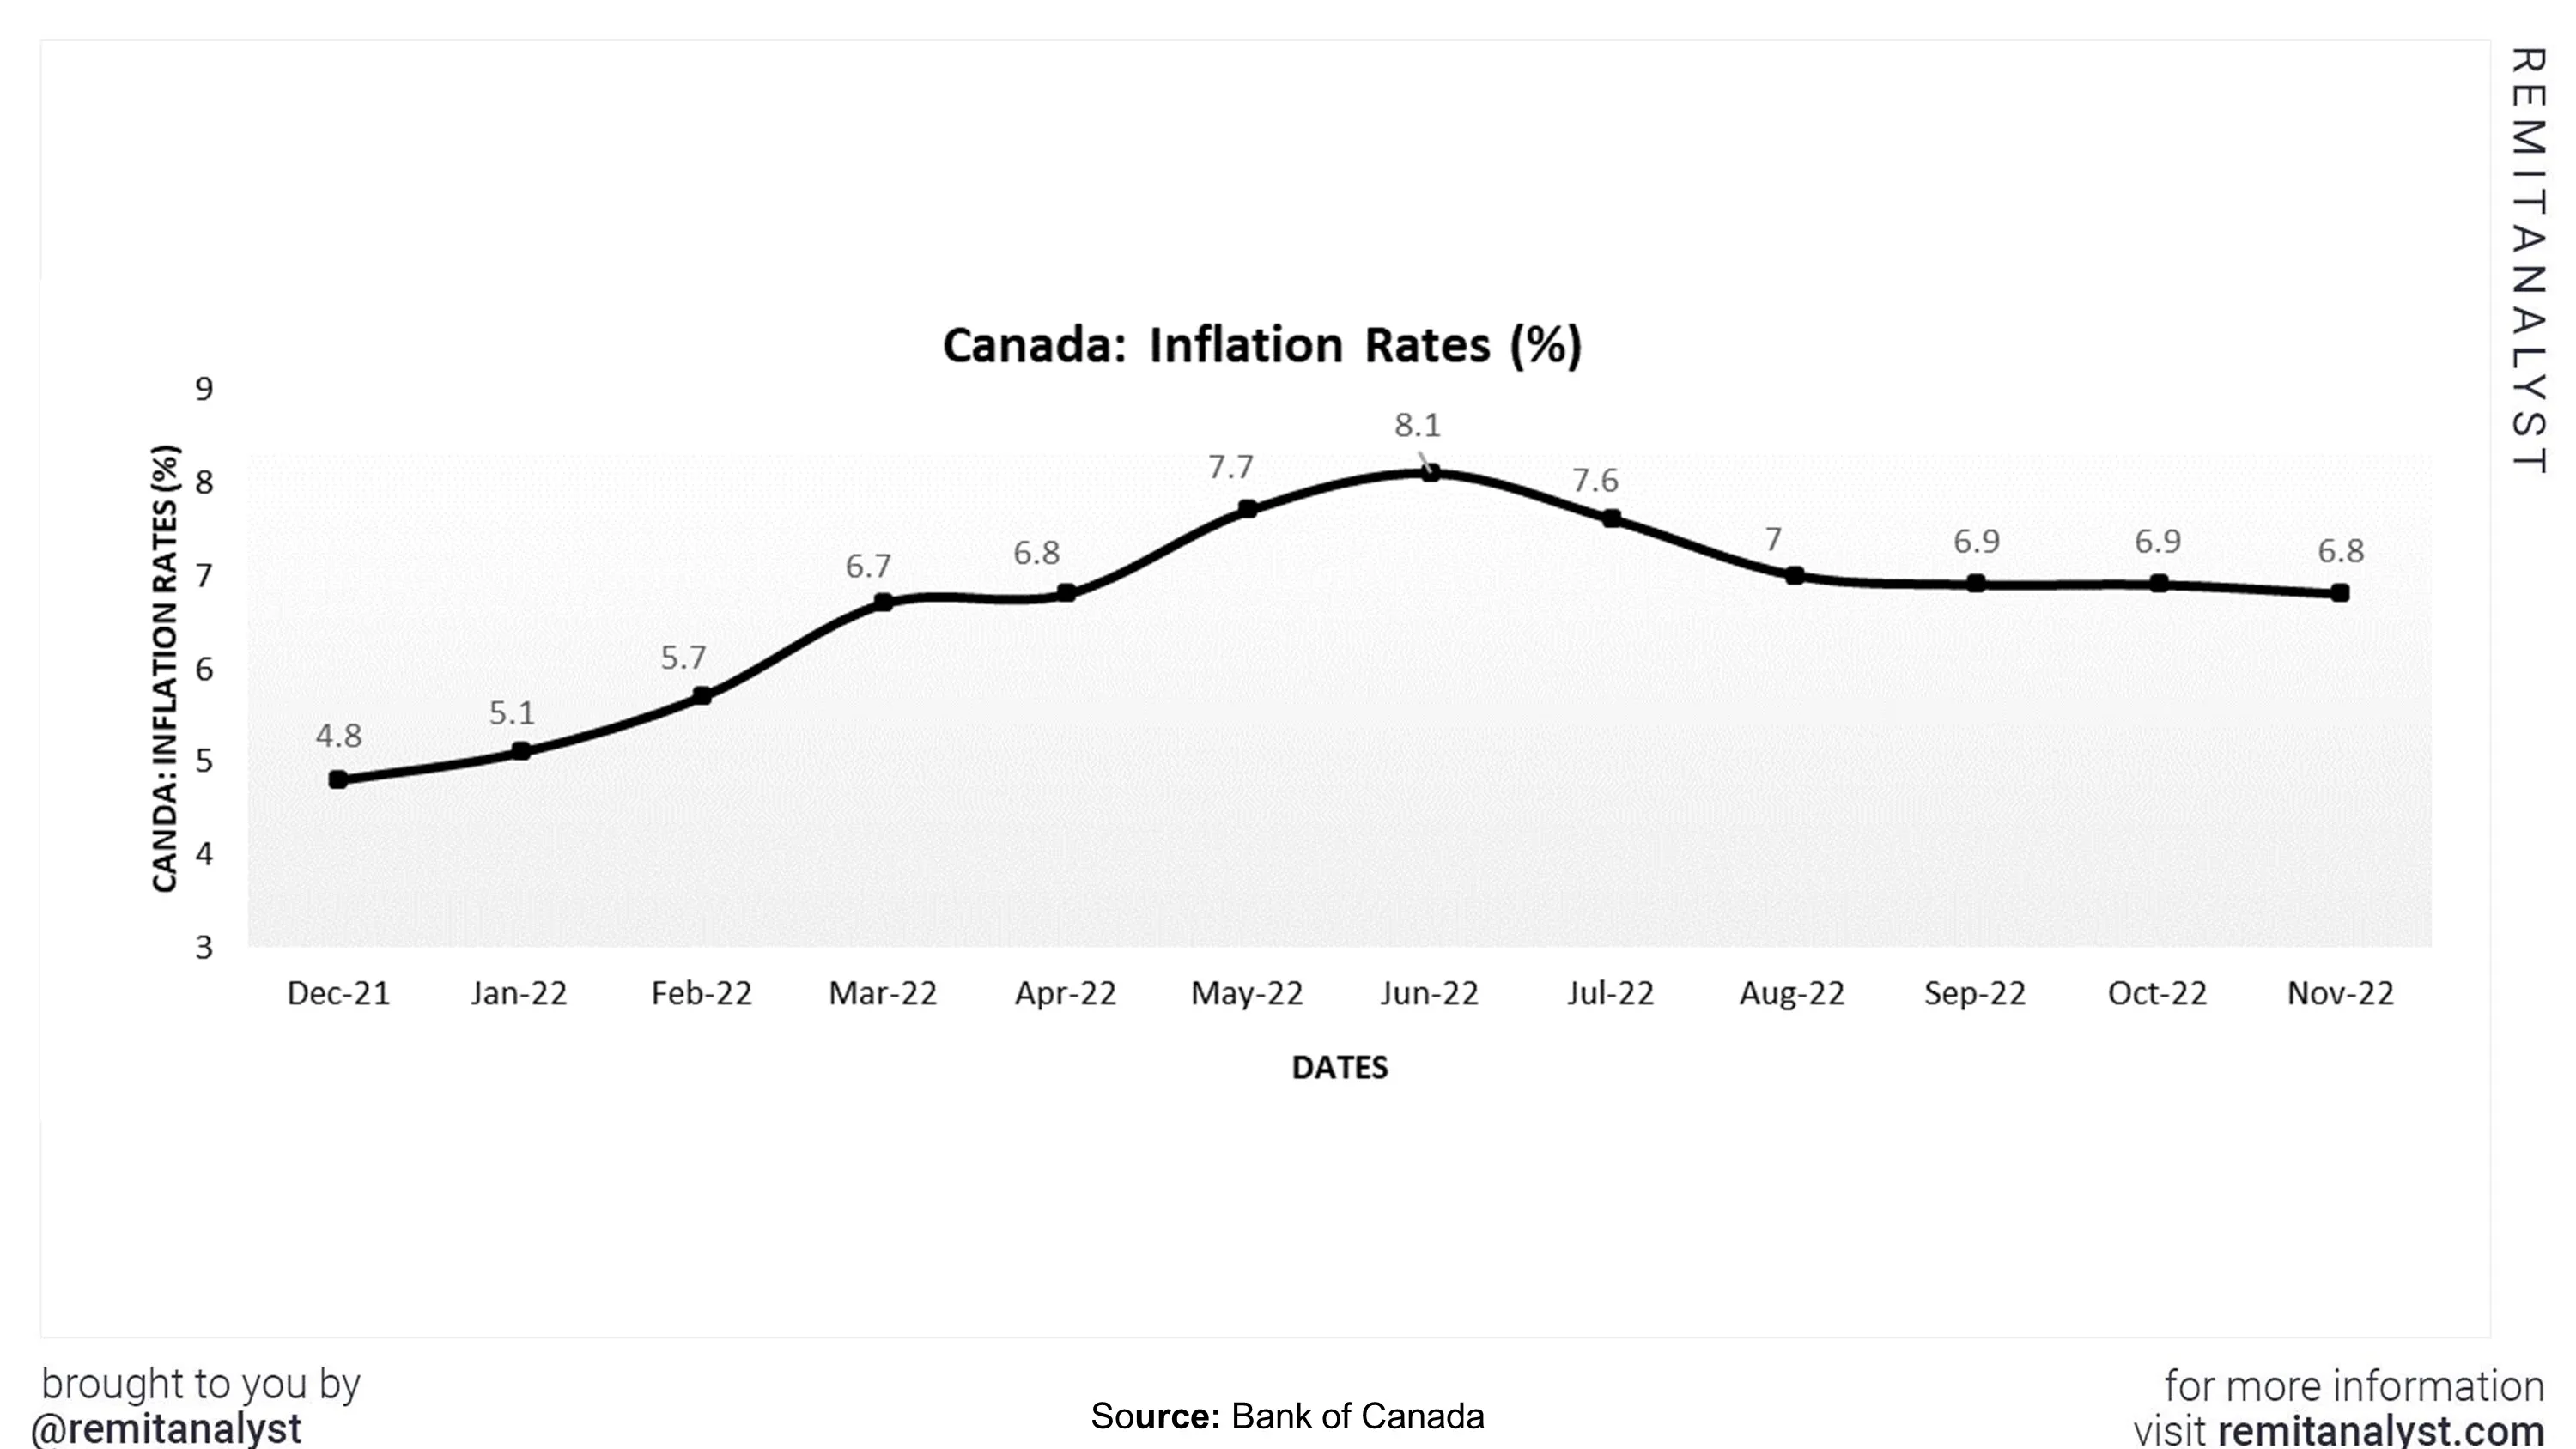 inflation-rates-canada-from-dec-2021-to-nov-2022